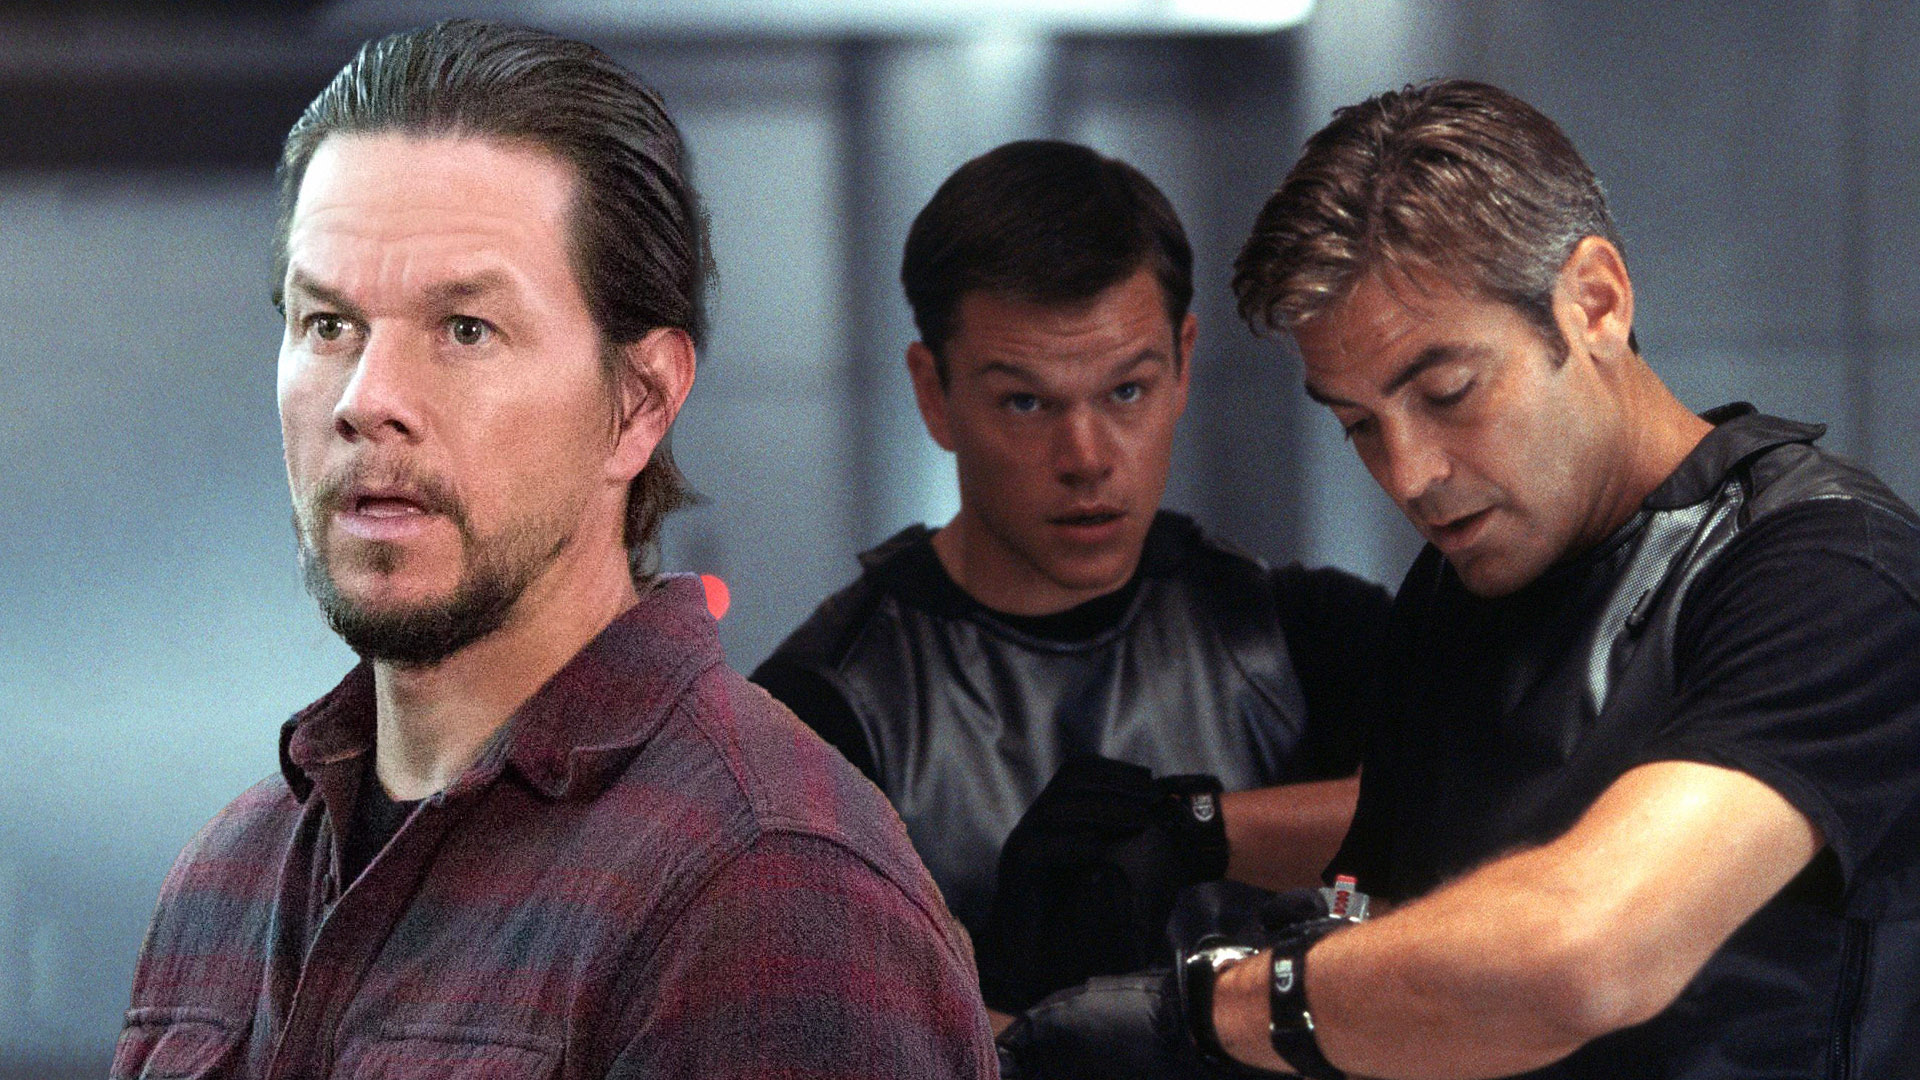 The Sole Reason Mark Wahlberg Didn't Accept the Ocean's Eleven Role